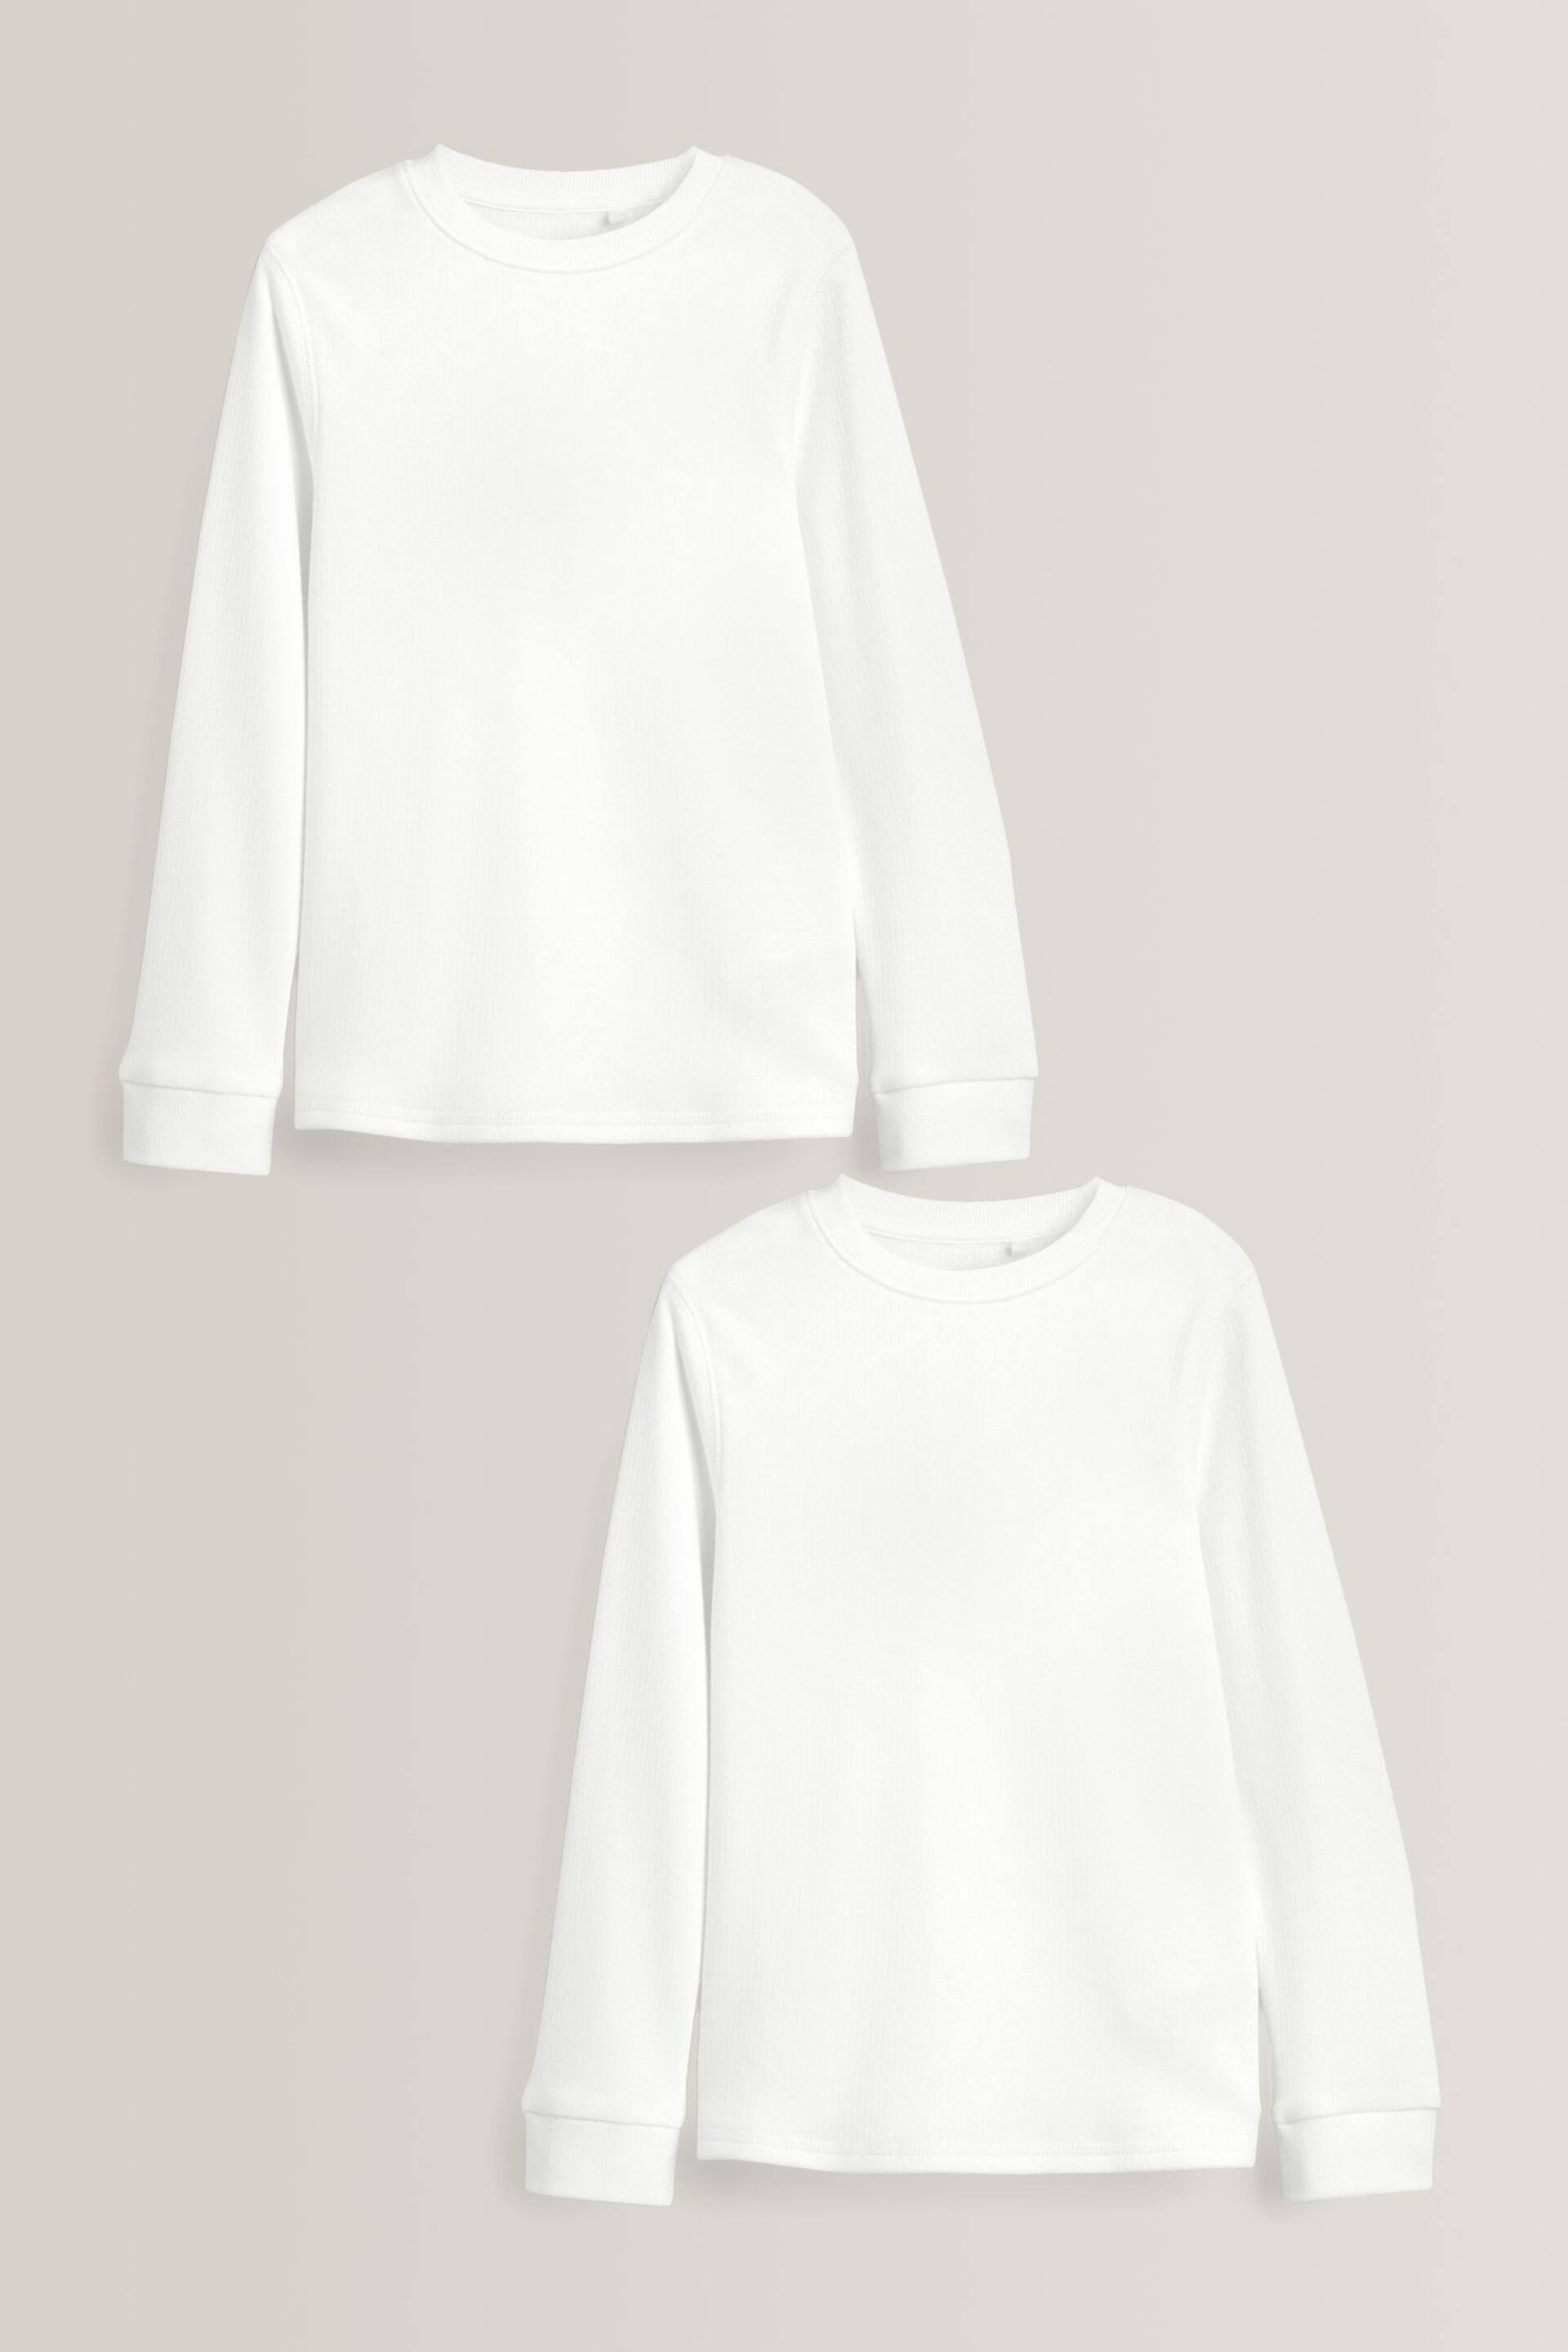 White Long Sleeve Thermal Tops 2 Pack (2-16yrs) - Image 1 of 4